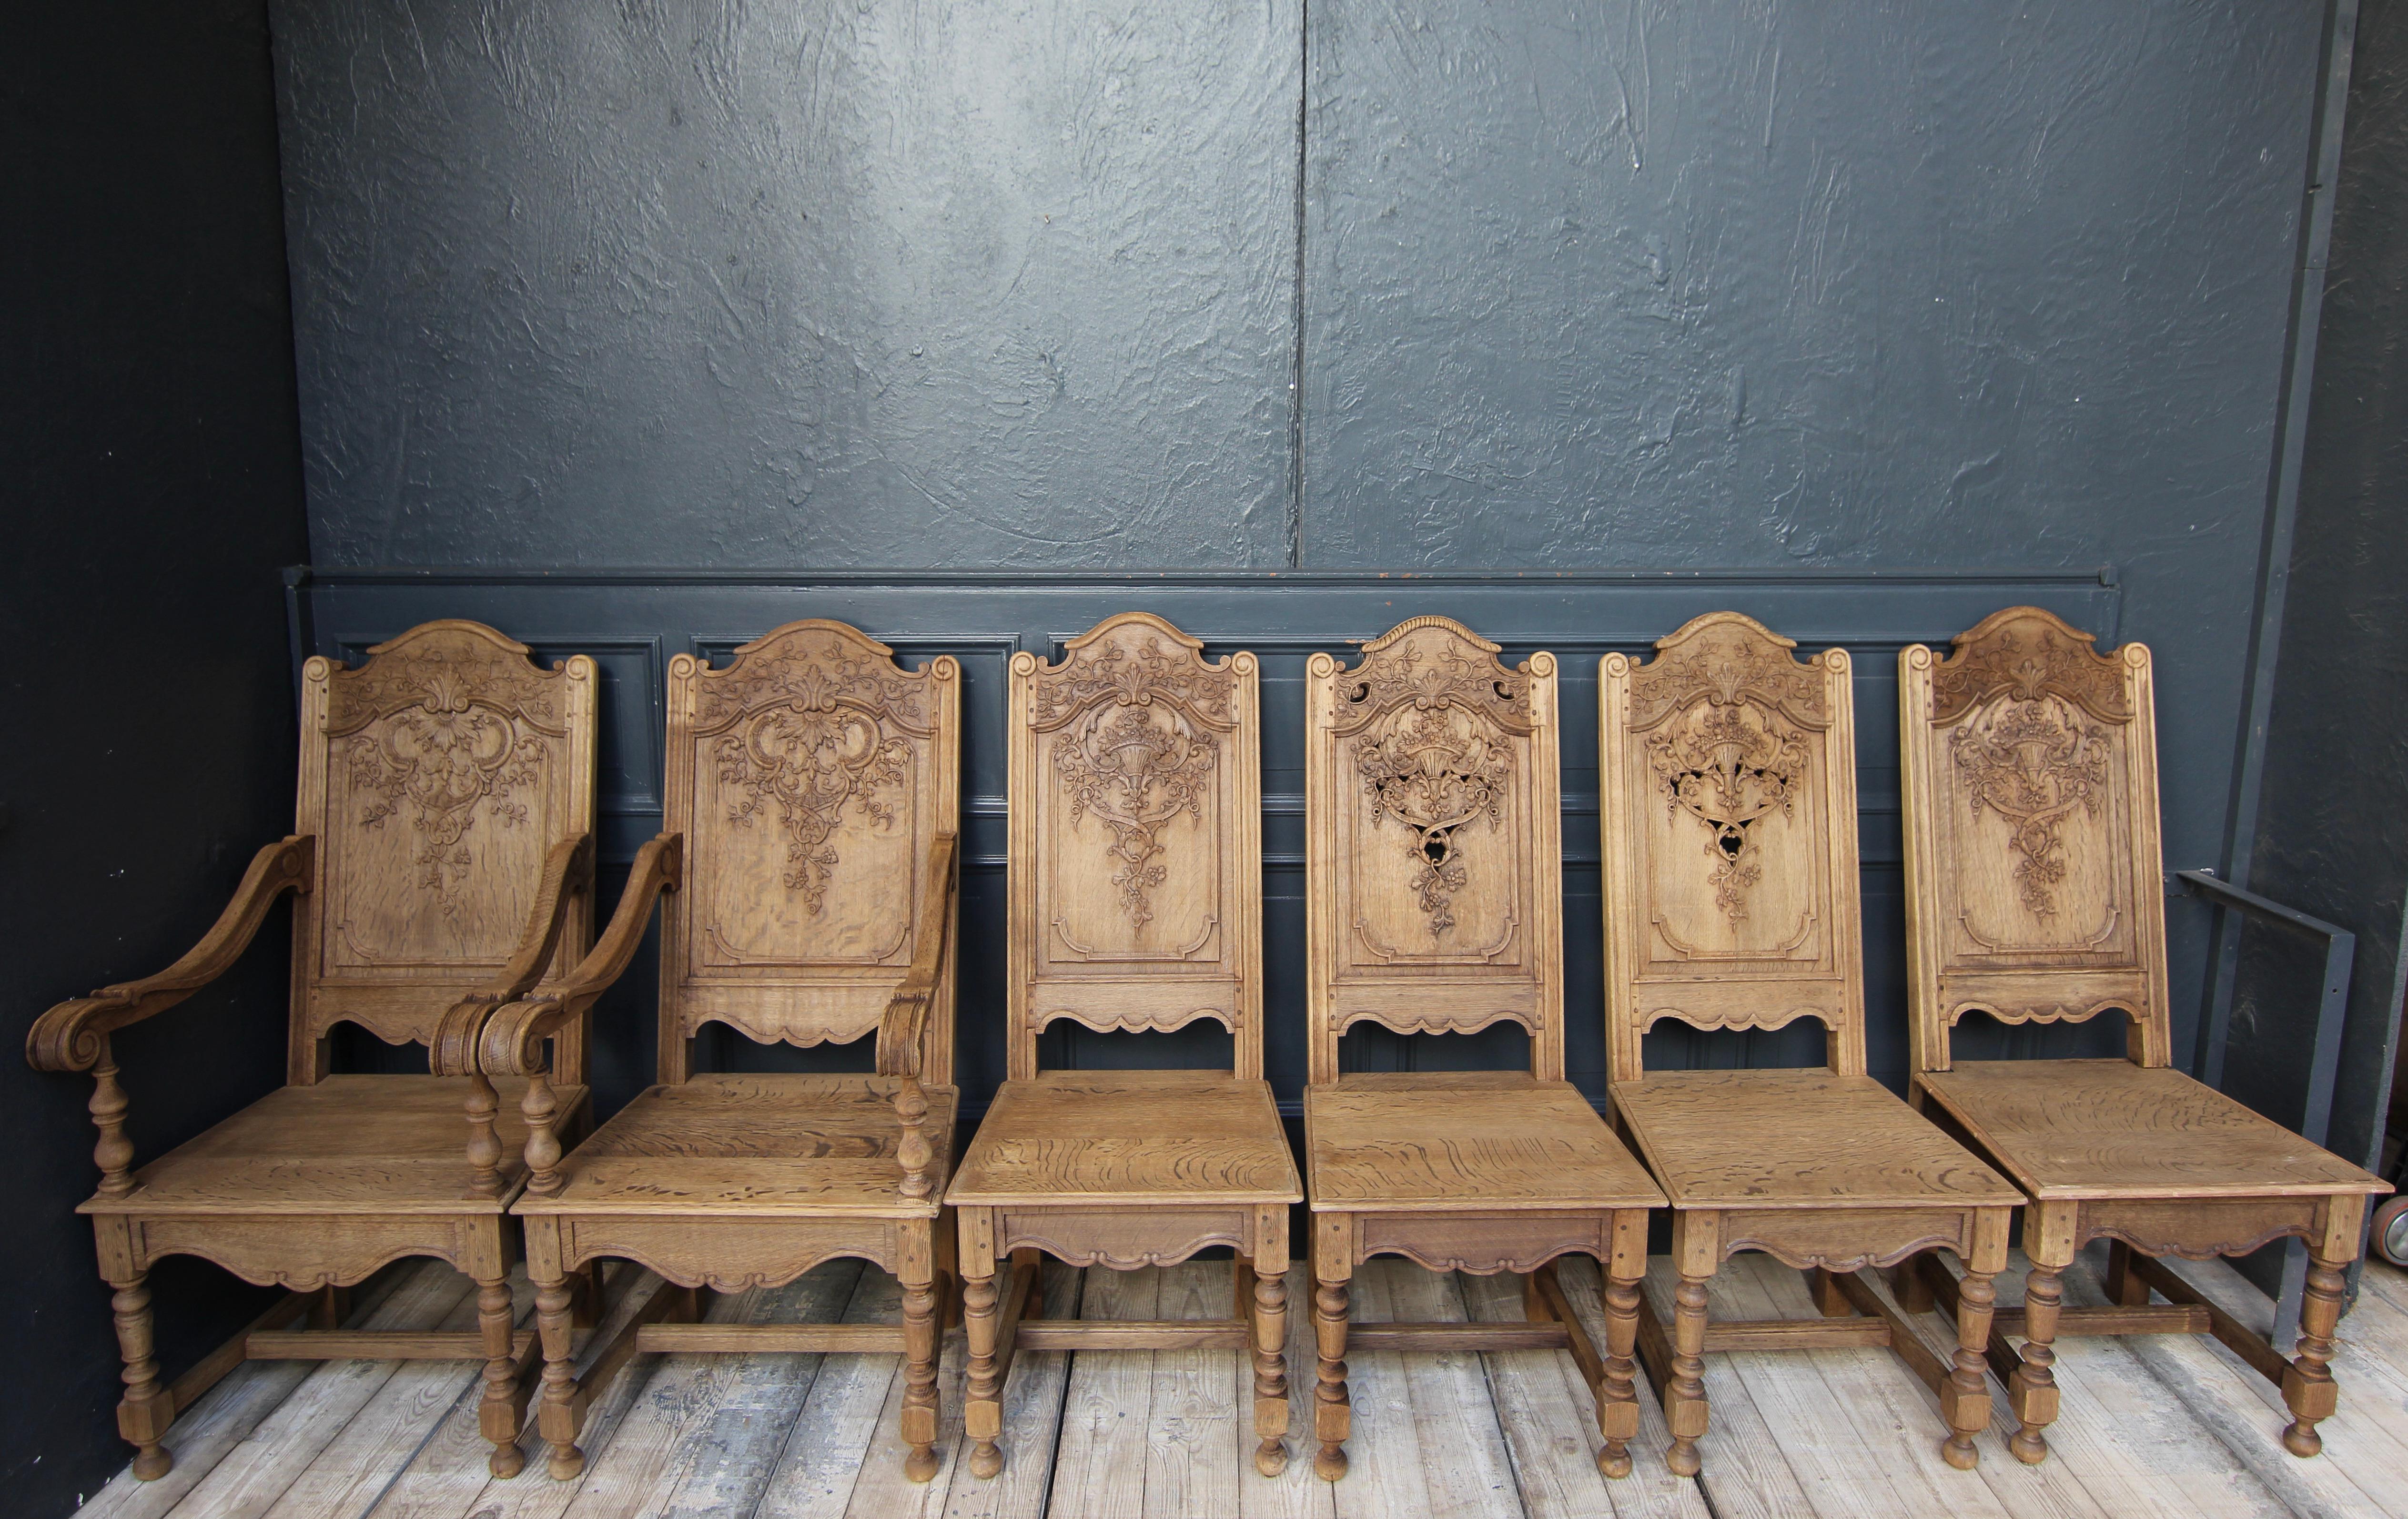 Stunning set of early 20th century Liege dining chairs. Two armchairs (fauteuils) and 4 chairs without backs. Solidly made in oak and carved ornamentally, as well as florally and with rocailles.

The wood has been stripped of the old wax,